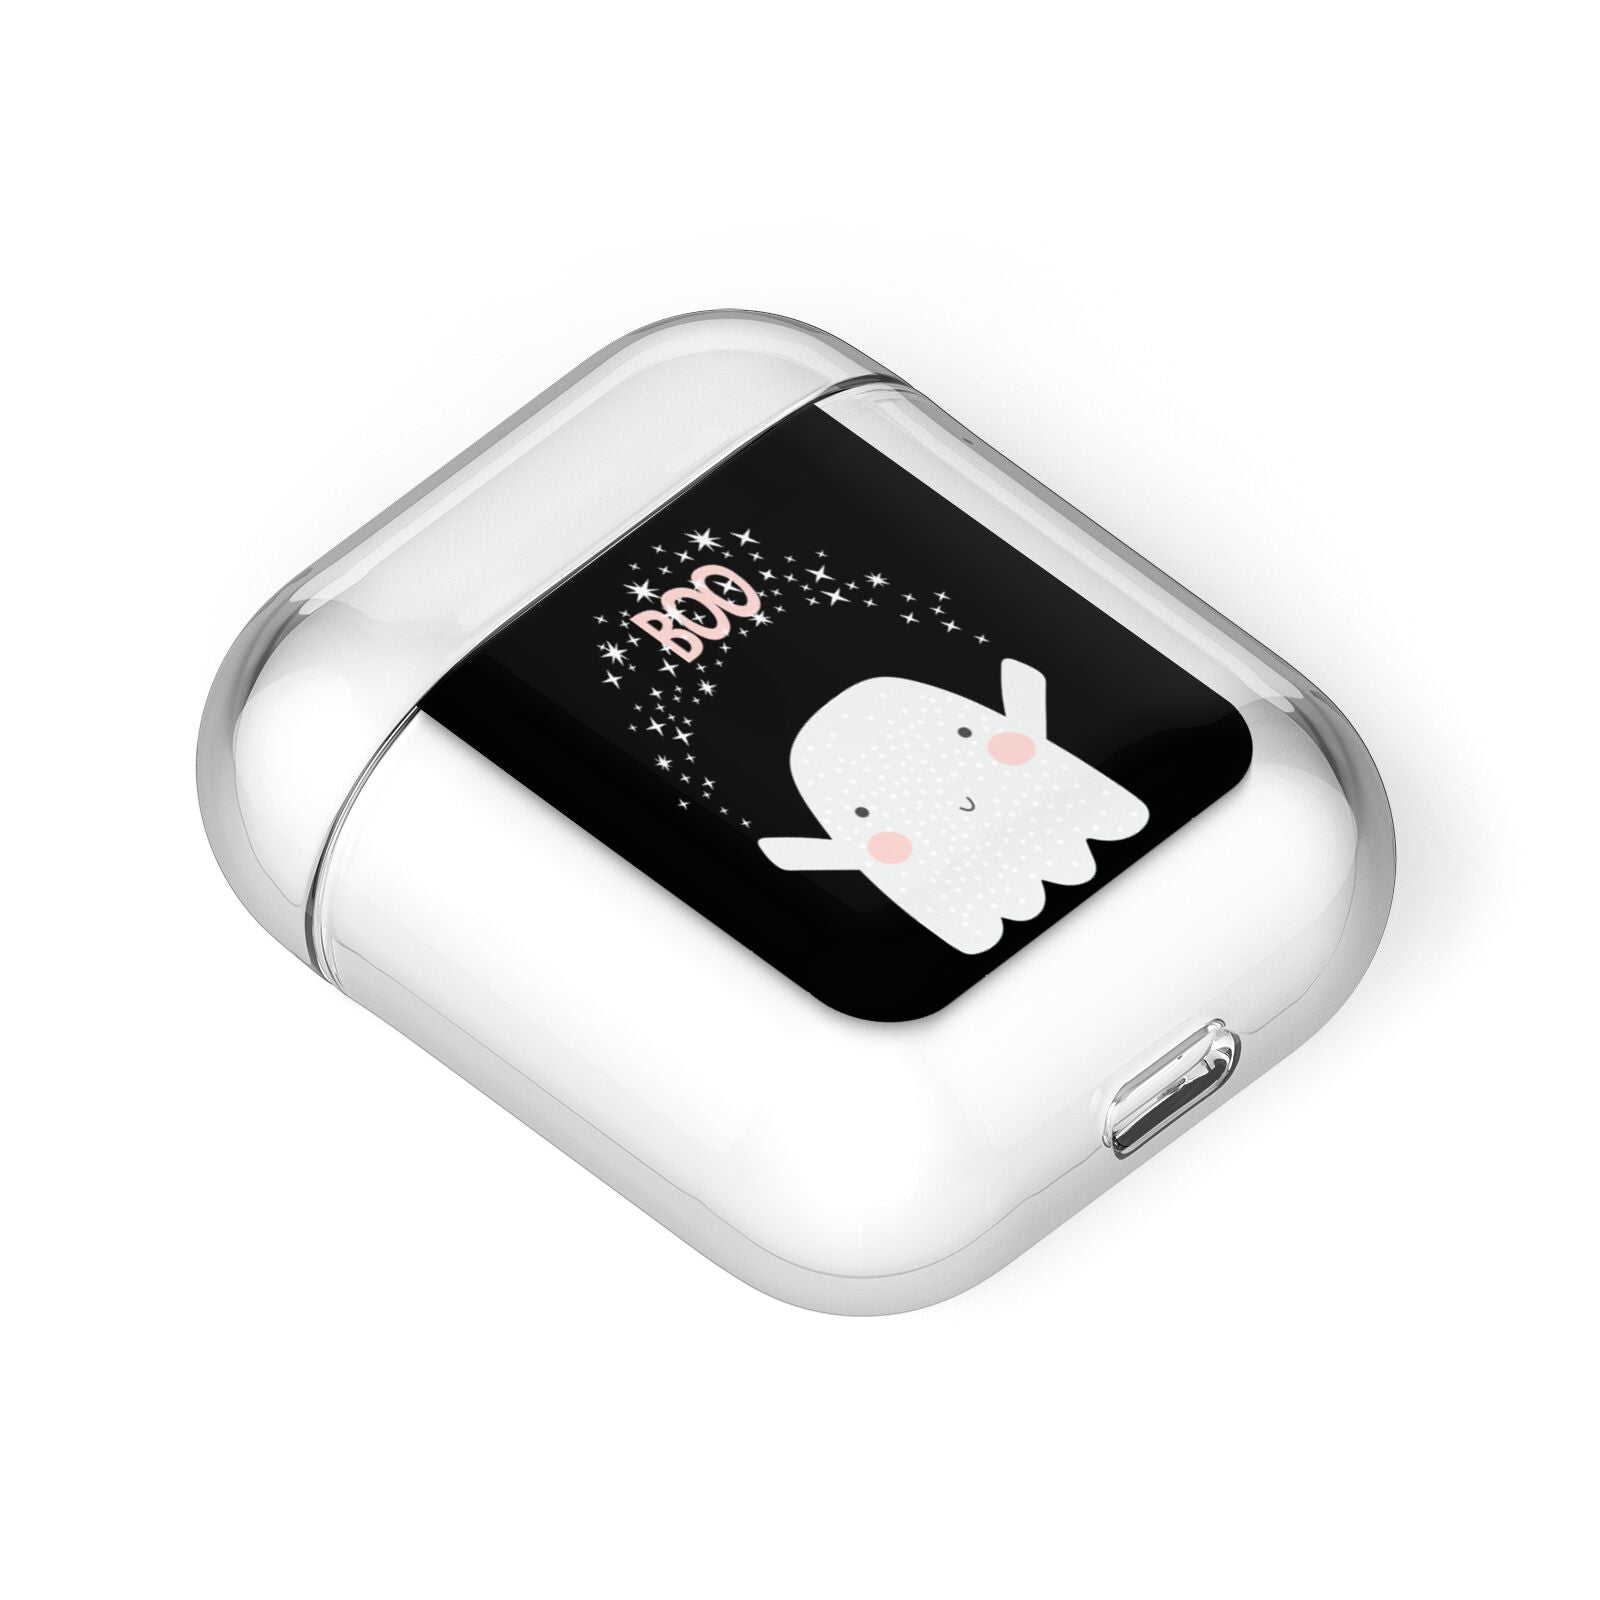 Magical Ghost AirPods Case Laid Flat